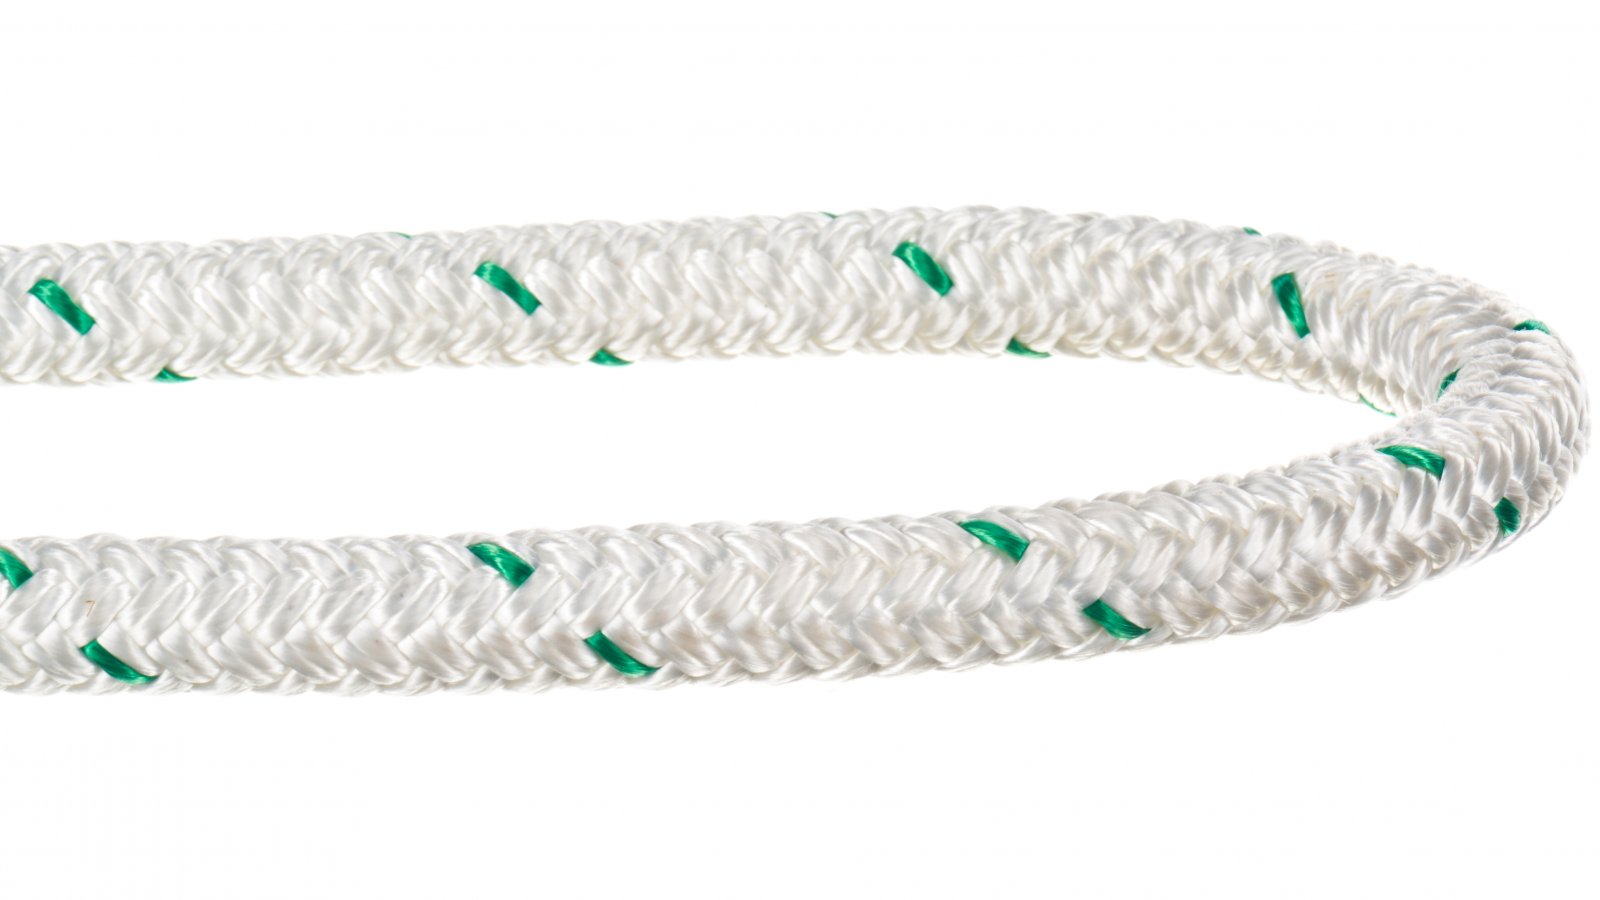 Polyester ropes - Lowest prices, free shipping